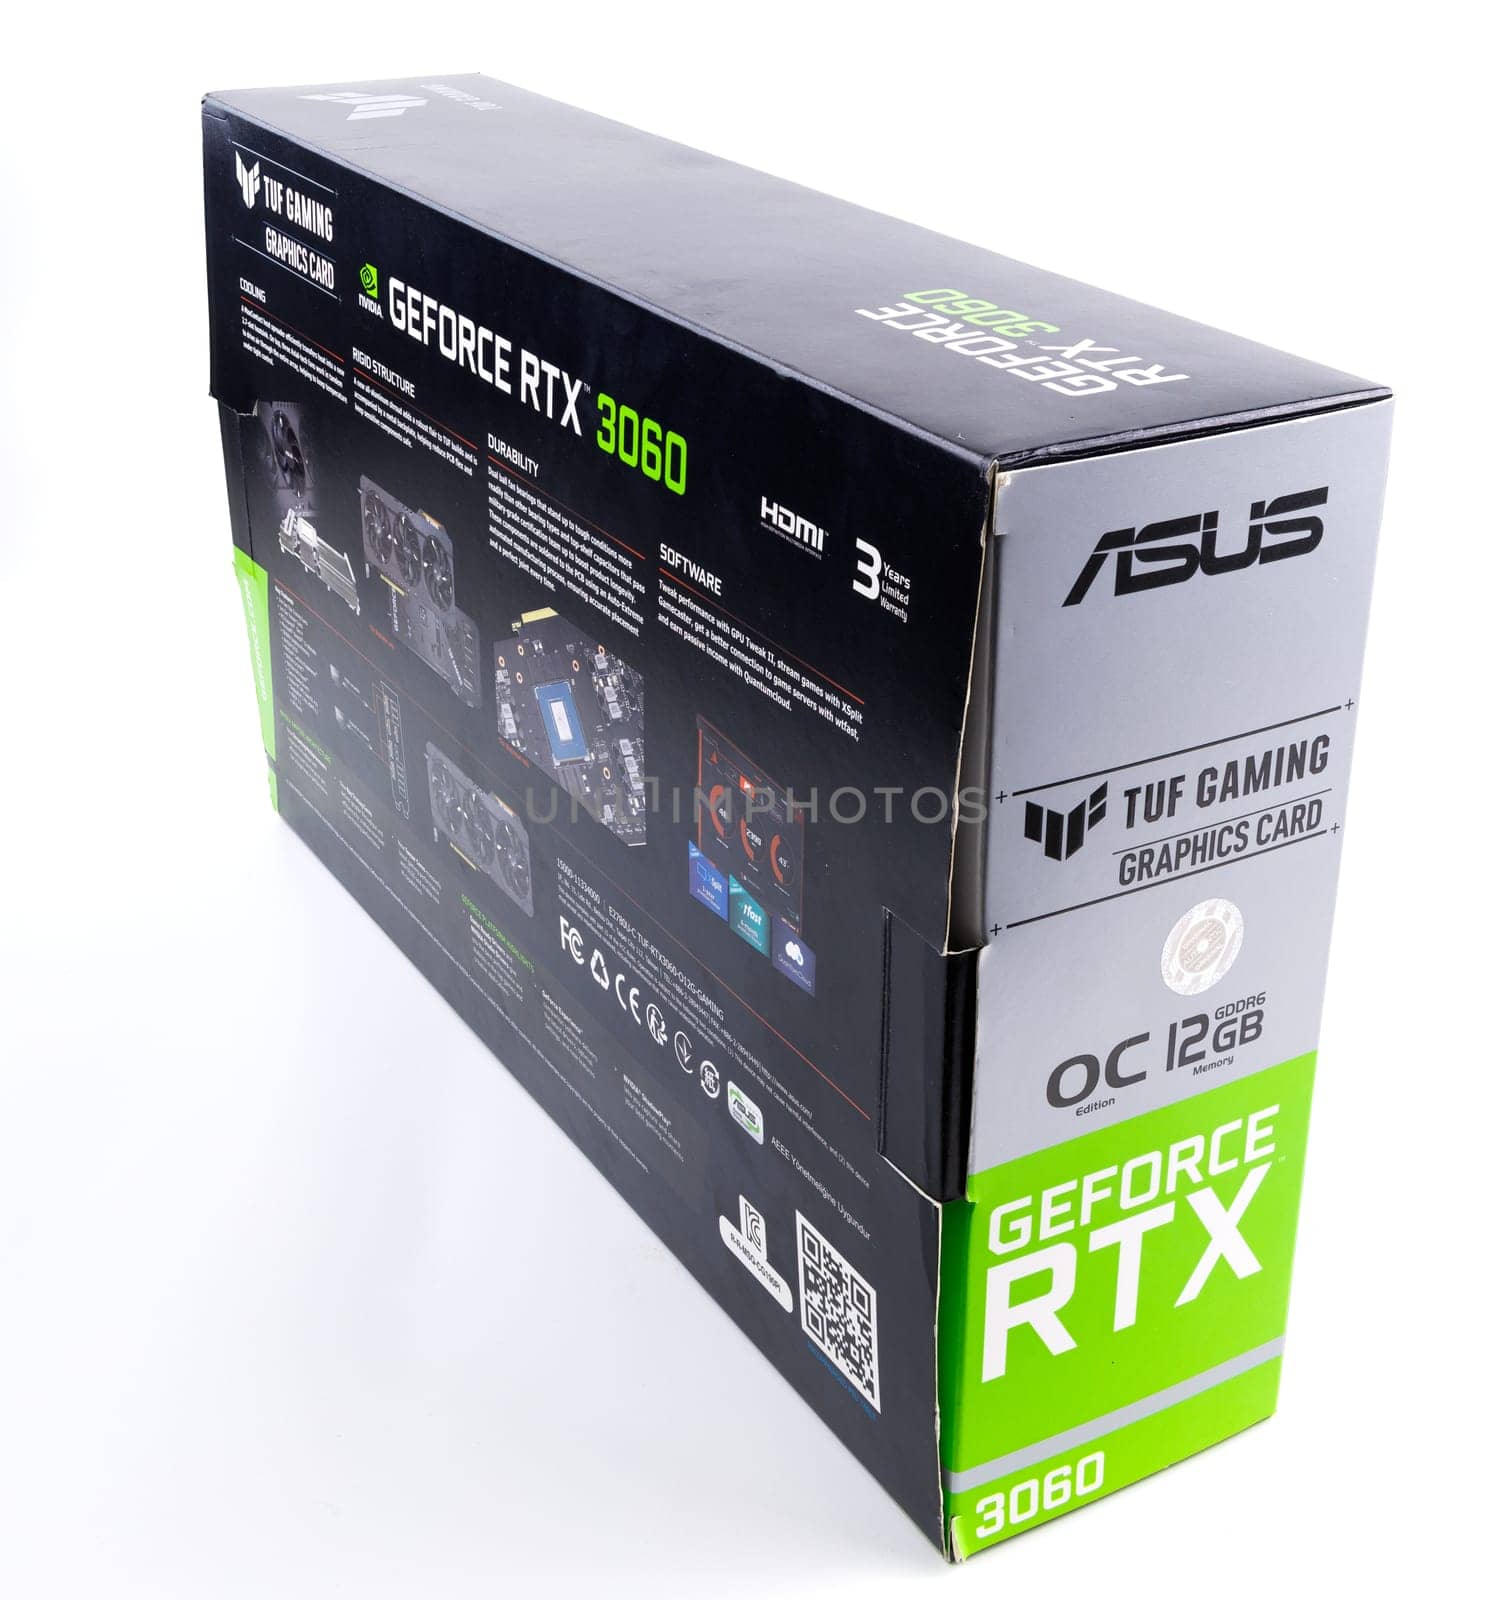 cardboard box of NVIDIA RTX 3060 OC 12g TUF gaming graphics card on white background by z1b